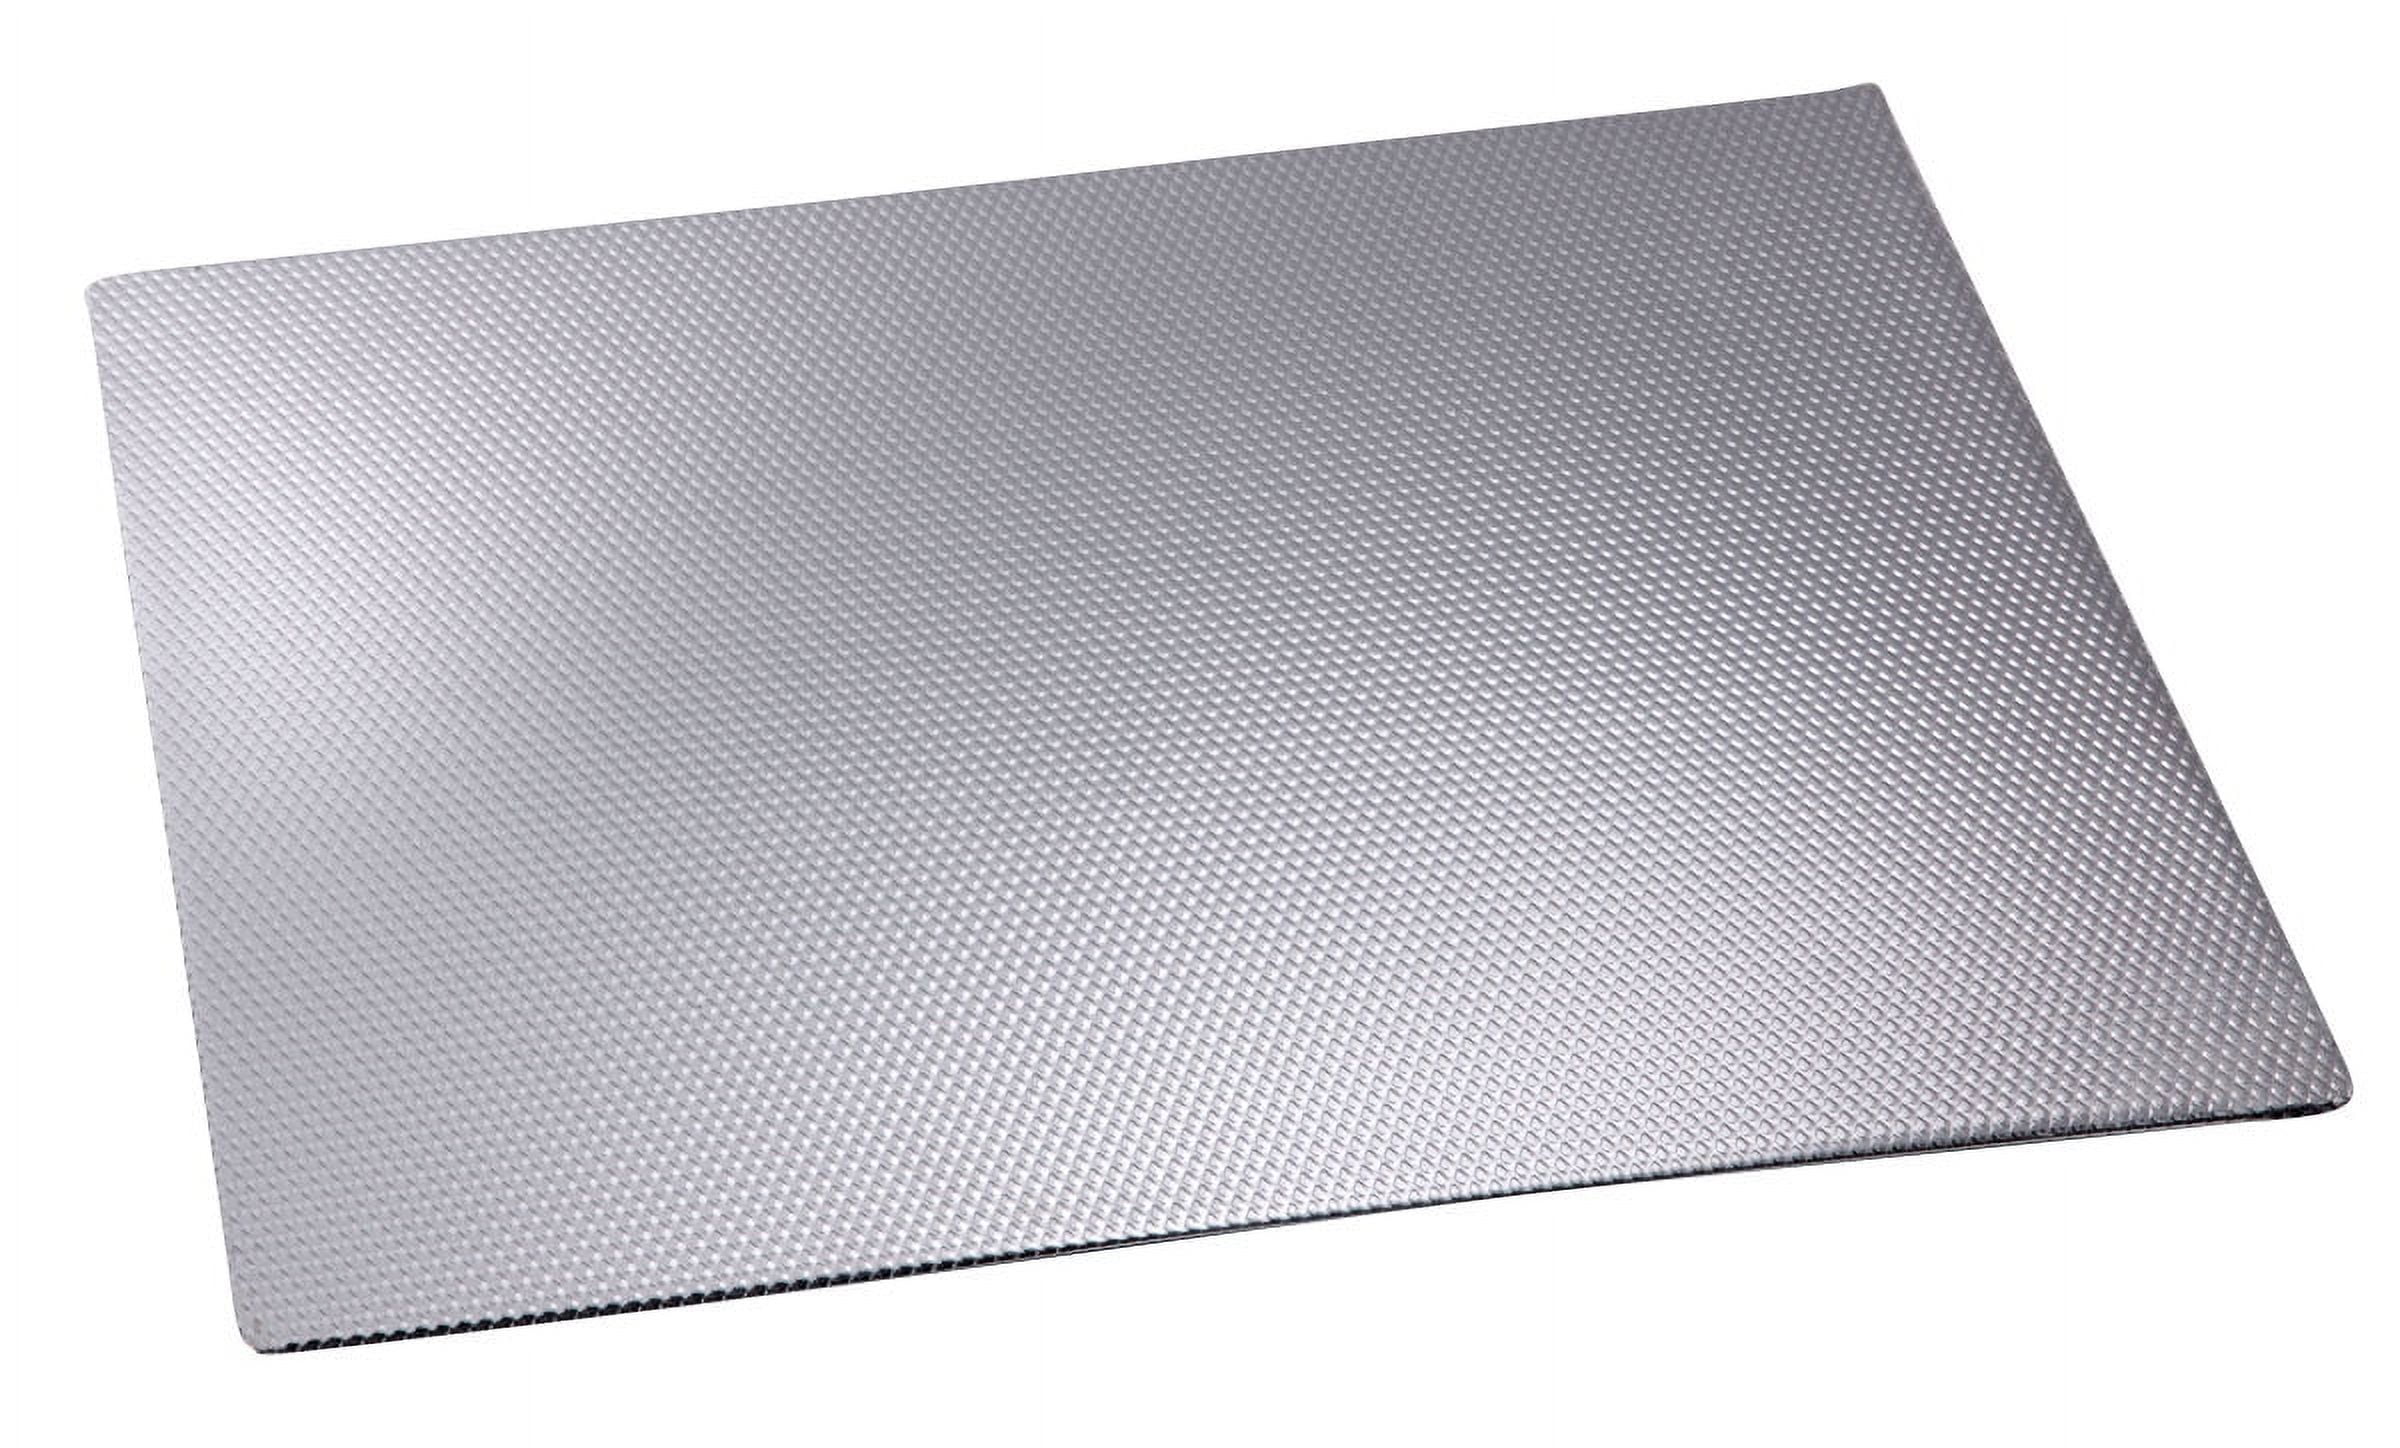  Range Kleen Silver Counter/Table Protector Mat-17 x 20-2 Pack  : Home & Kitchen